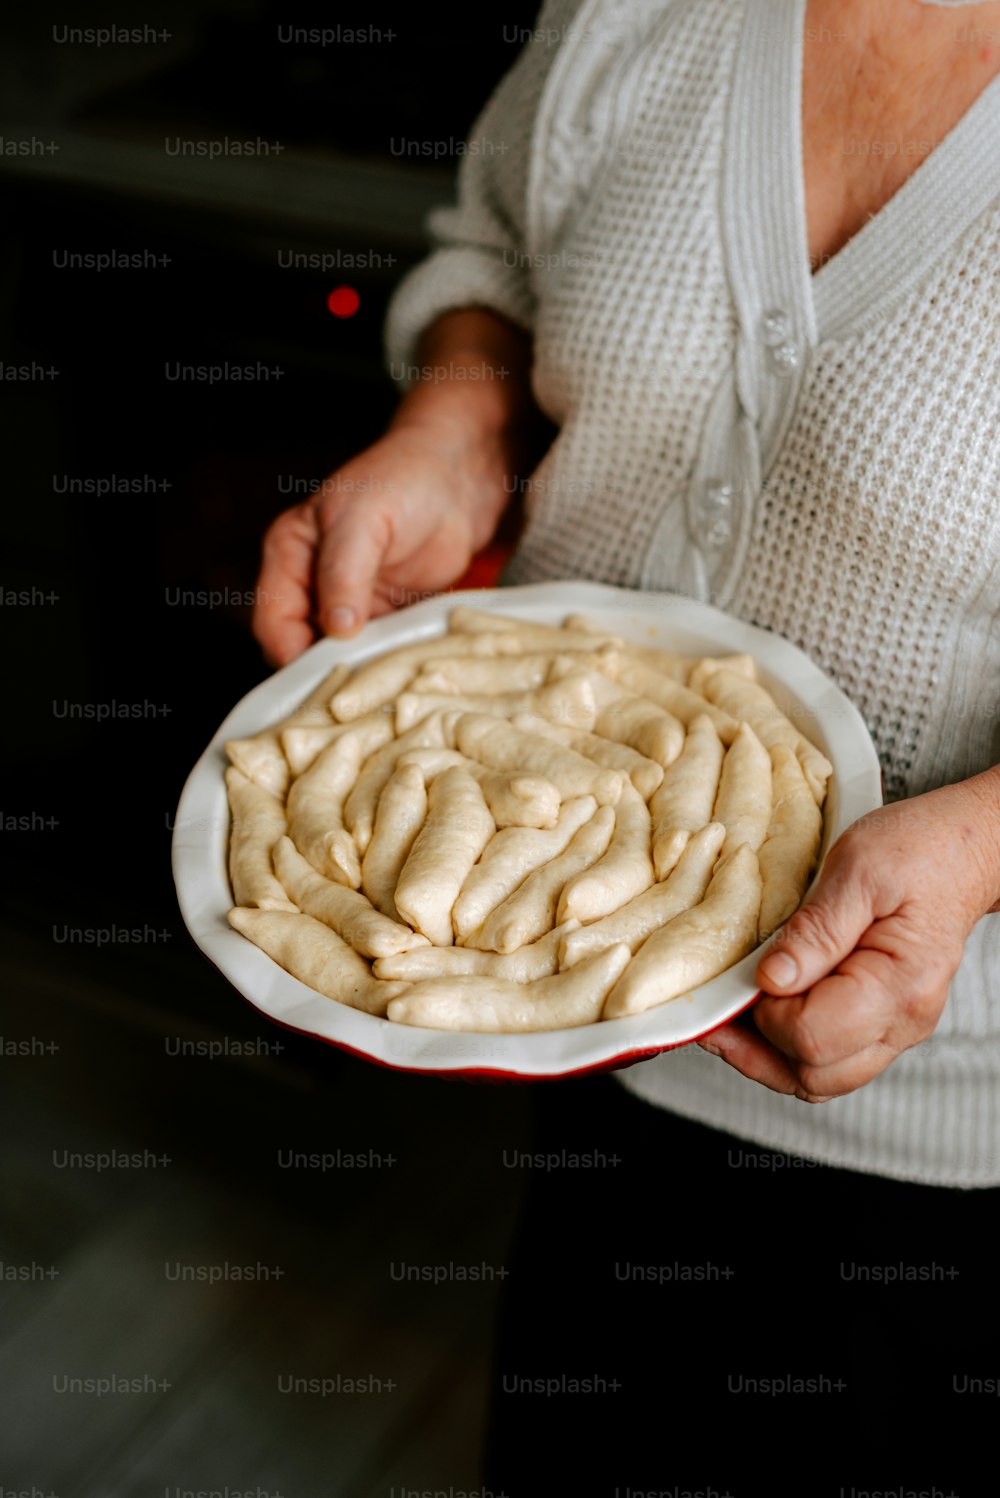 a person holding a plate of food in their hands